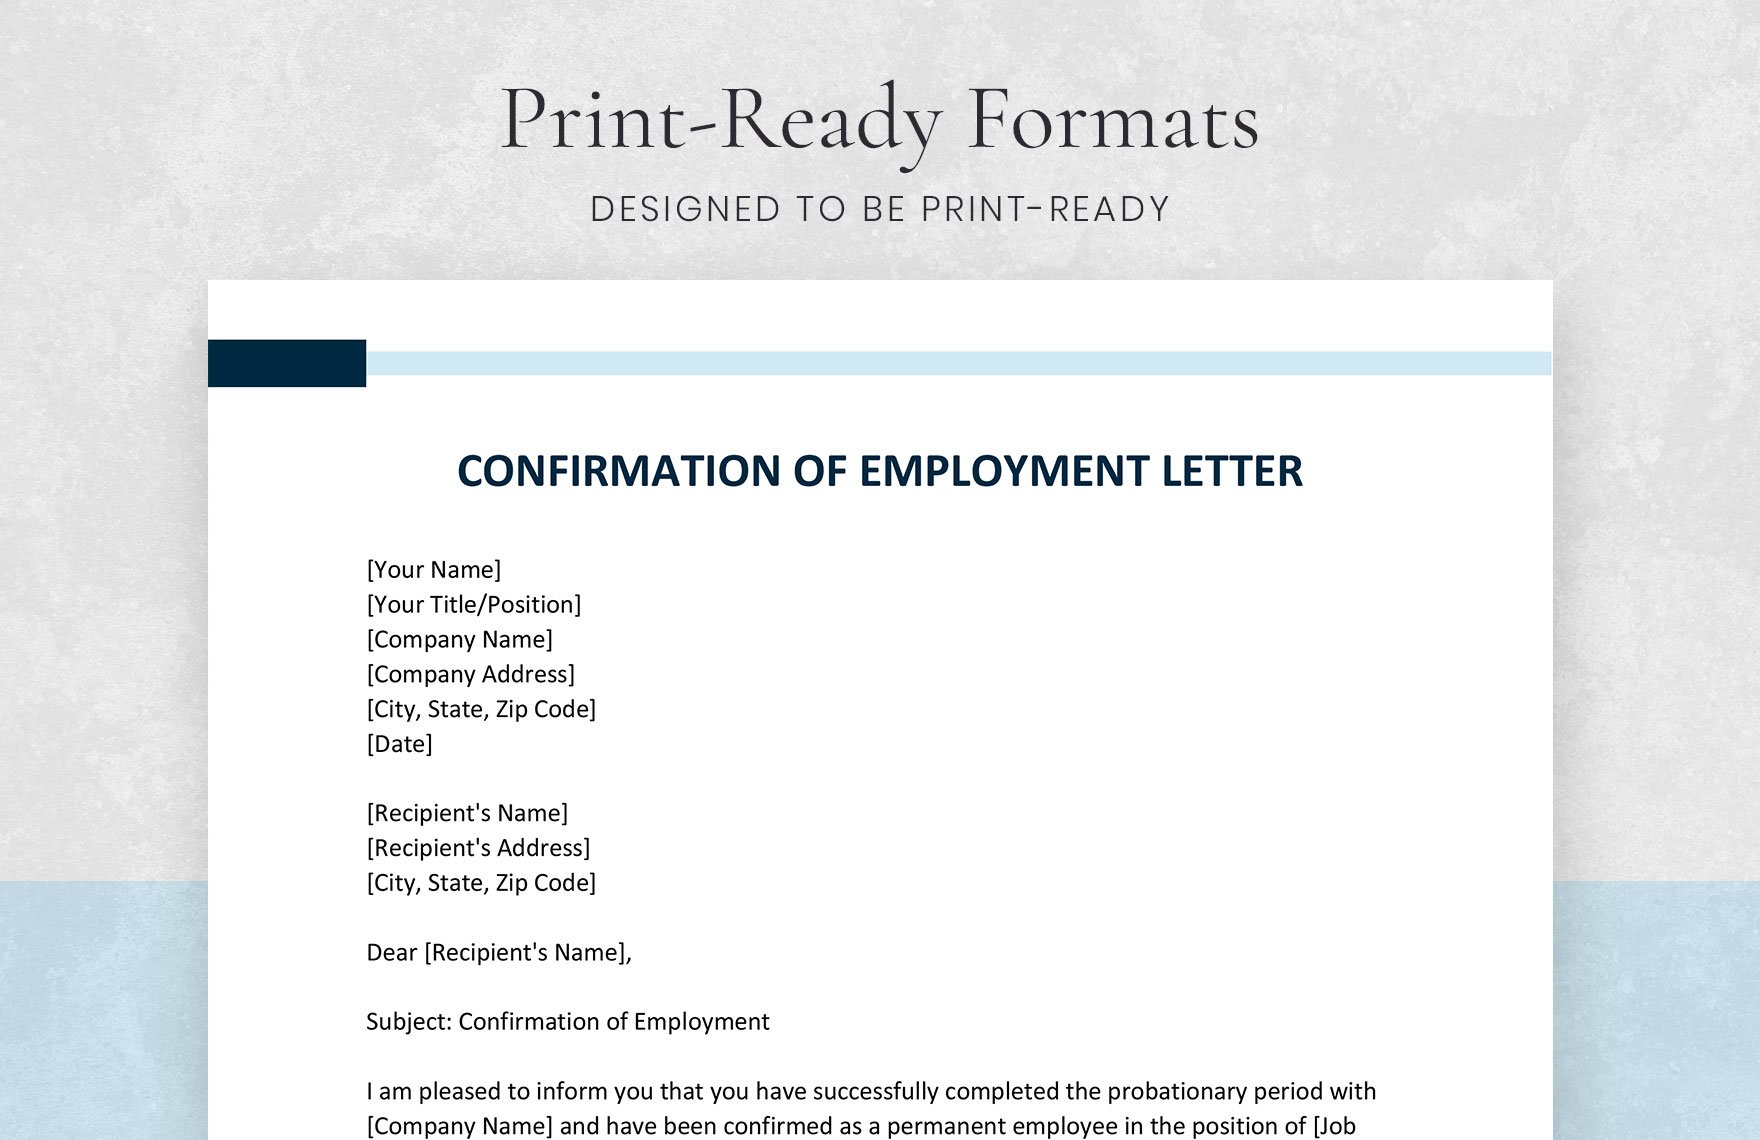 Confirmation of Employment Letter